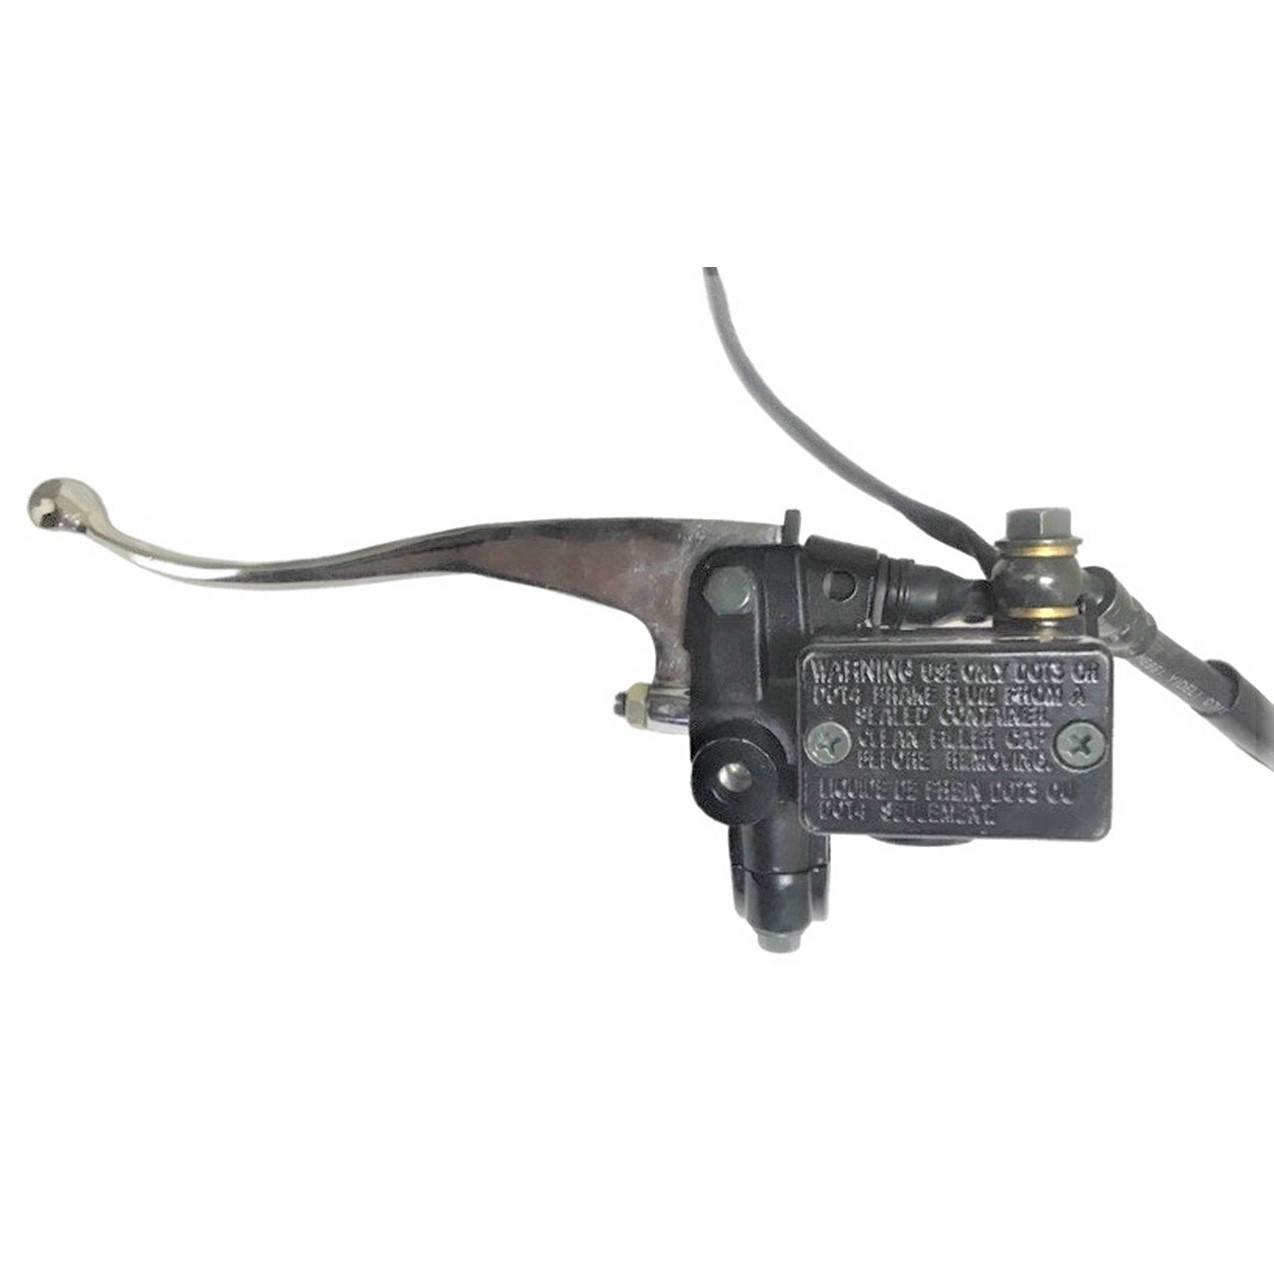 Rear Brake Assembly Brake Line L=84" Mount Holes 44mm Ctr to Ctr Caliper L=97 W=72 - Click Image to Close